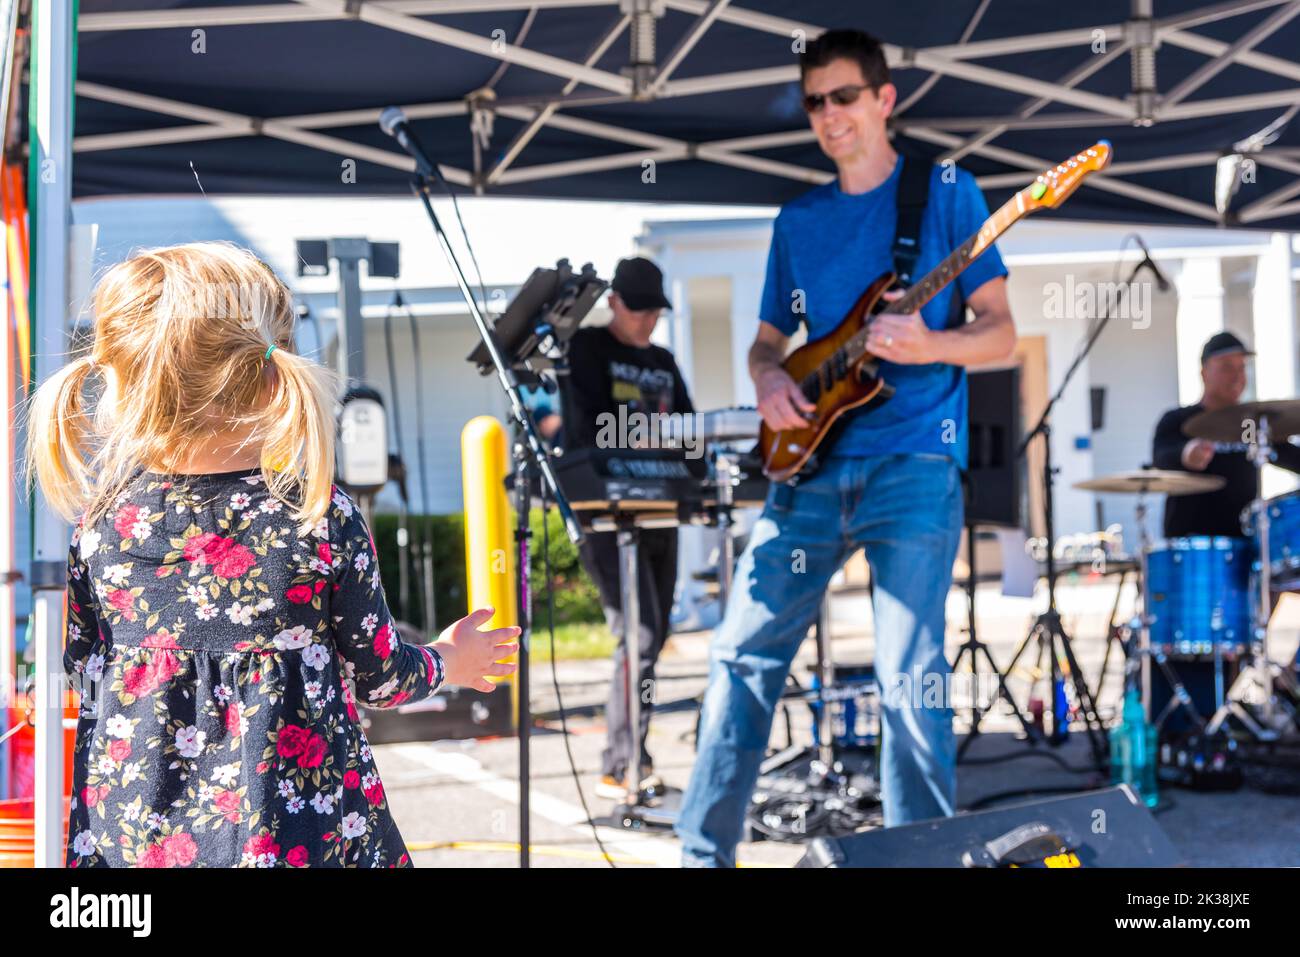 Impact, a Boston band, performing at the West Concord Porchfest, an annual grassroots community music festival in West Concord, Massachusetts. Stock Photo